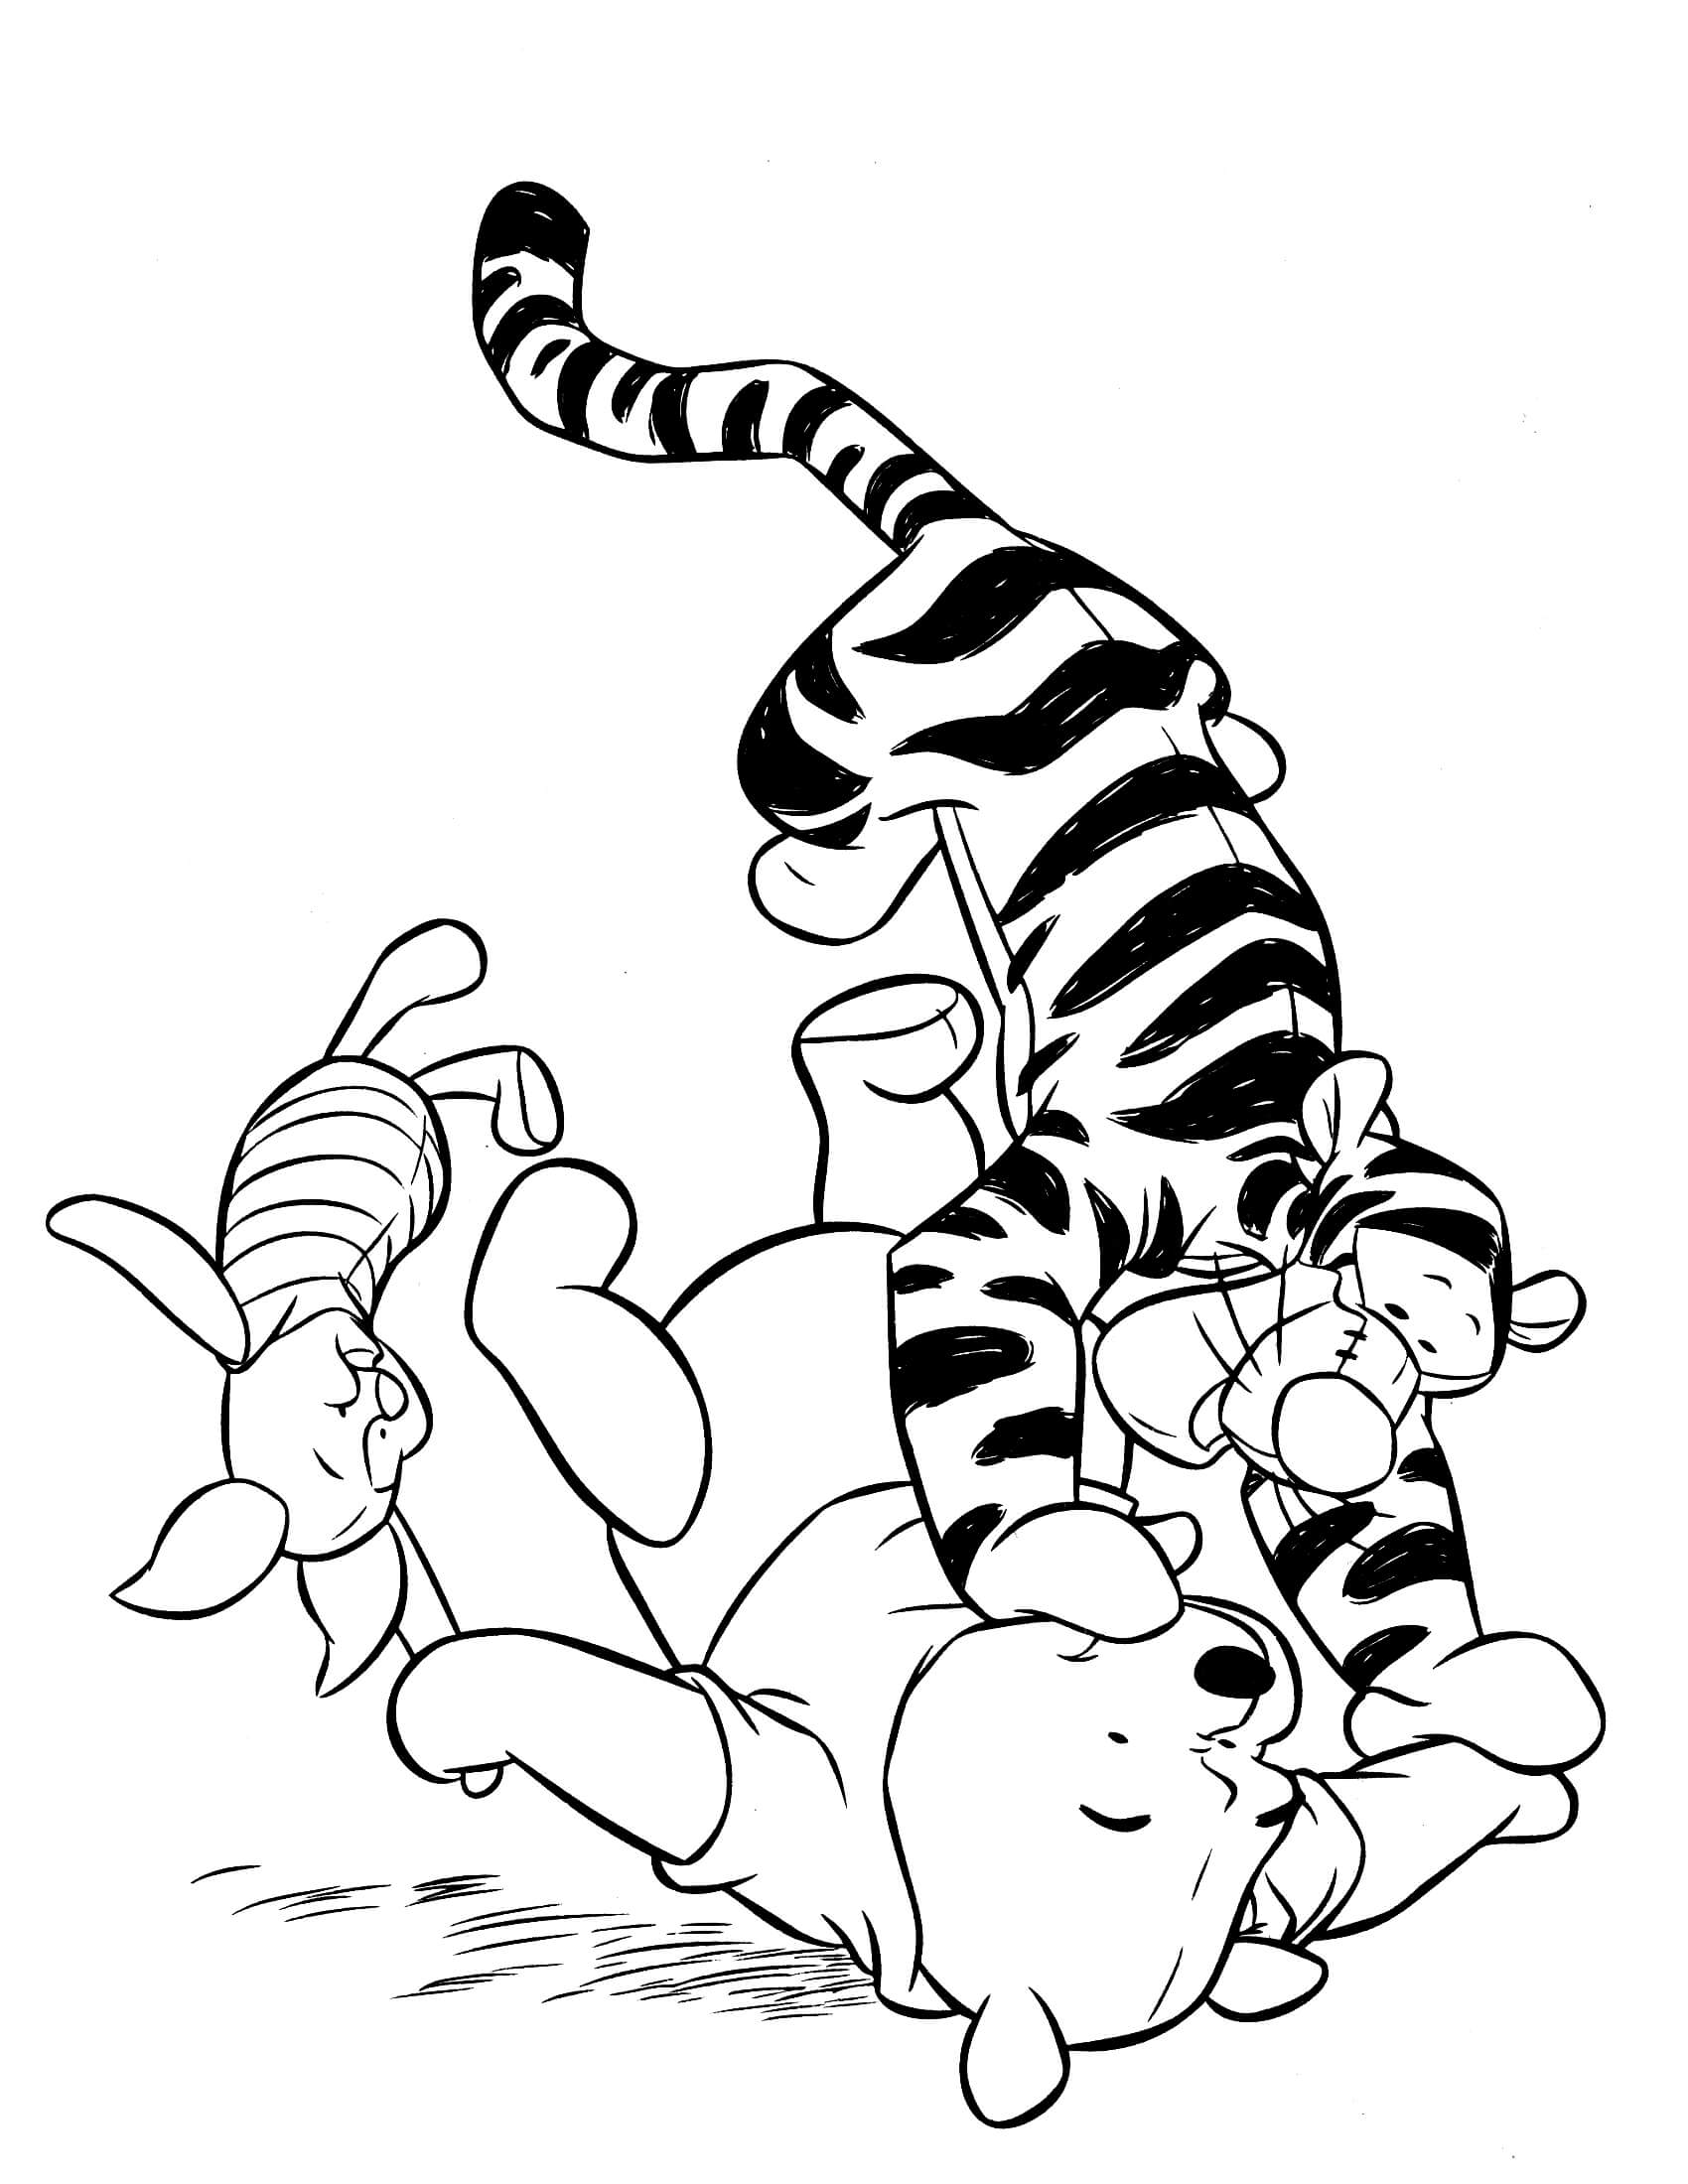 Tigger Pounces Again Winnie the Pooh Coloring Pages